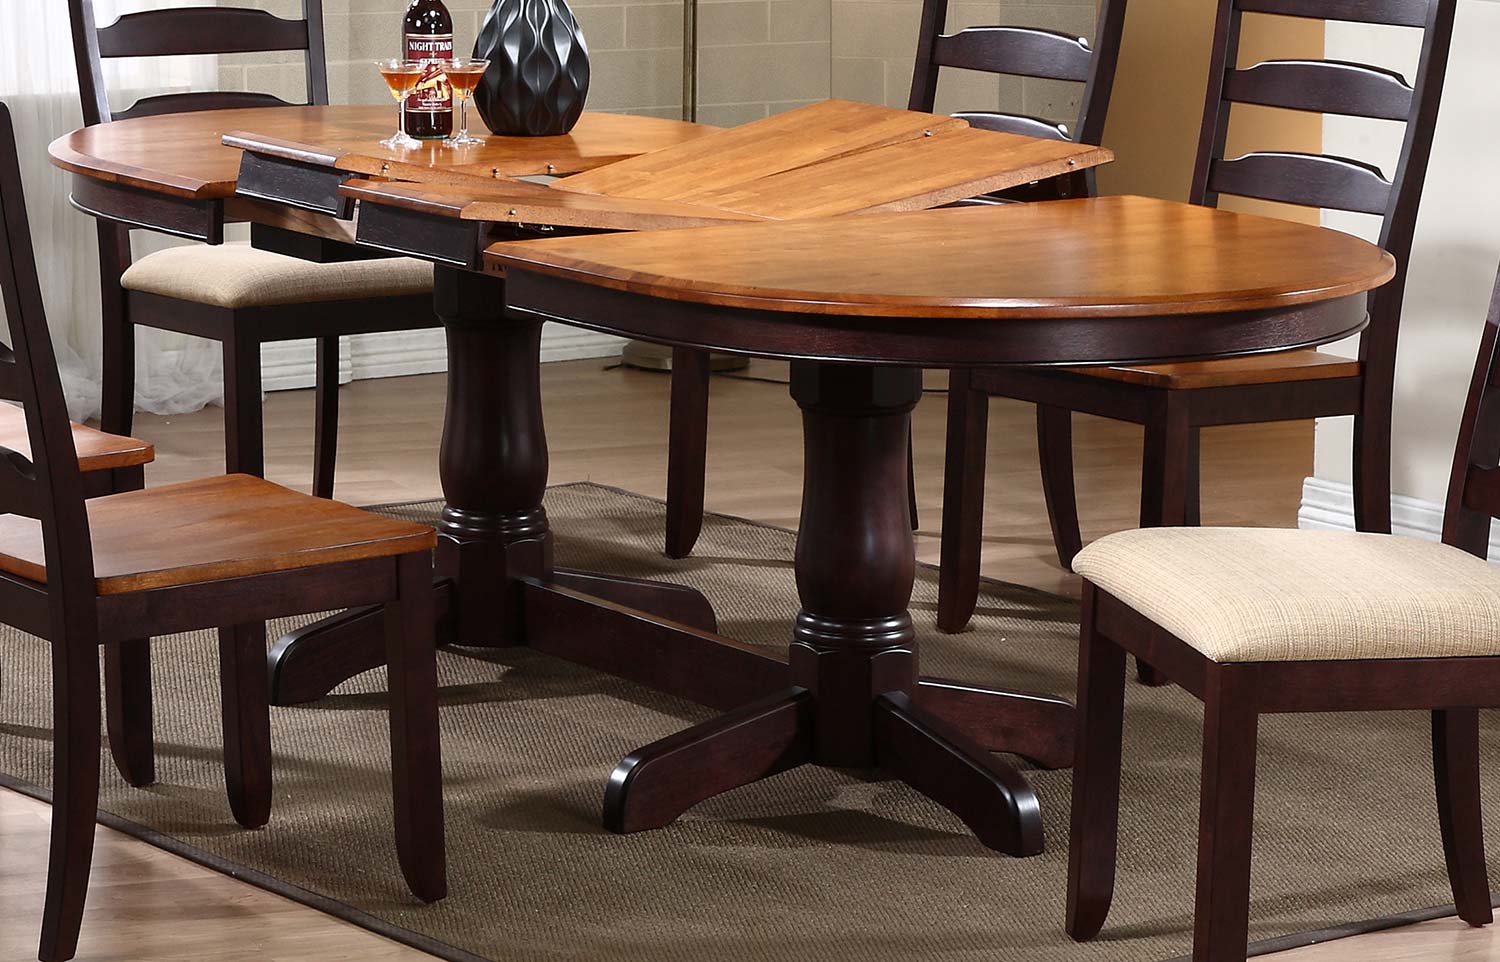 Iconic Furniture Oval Double Pedestal Dining Table - Whiskey/Mocha